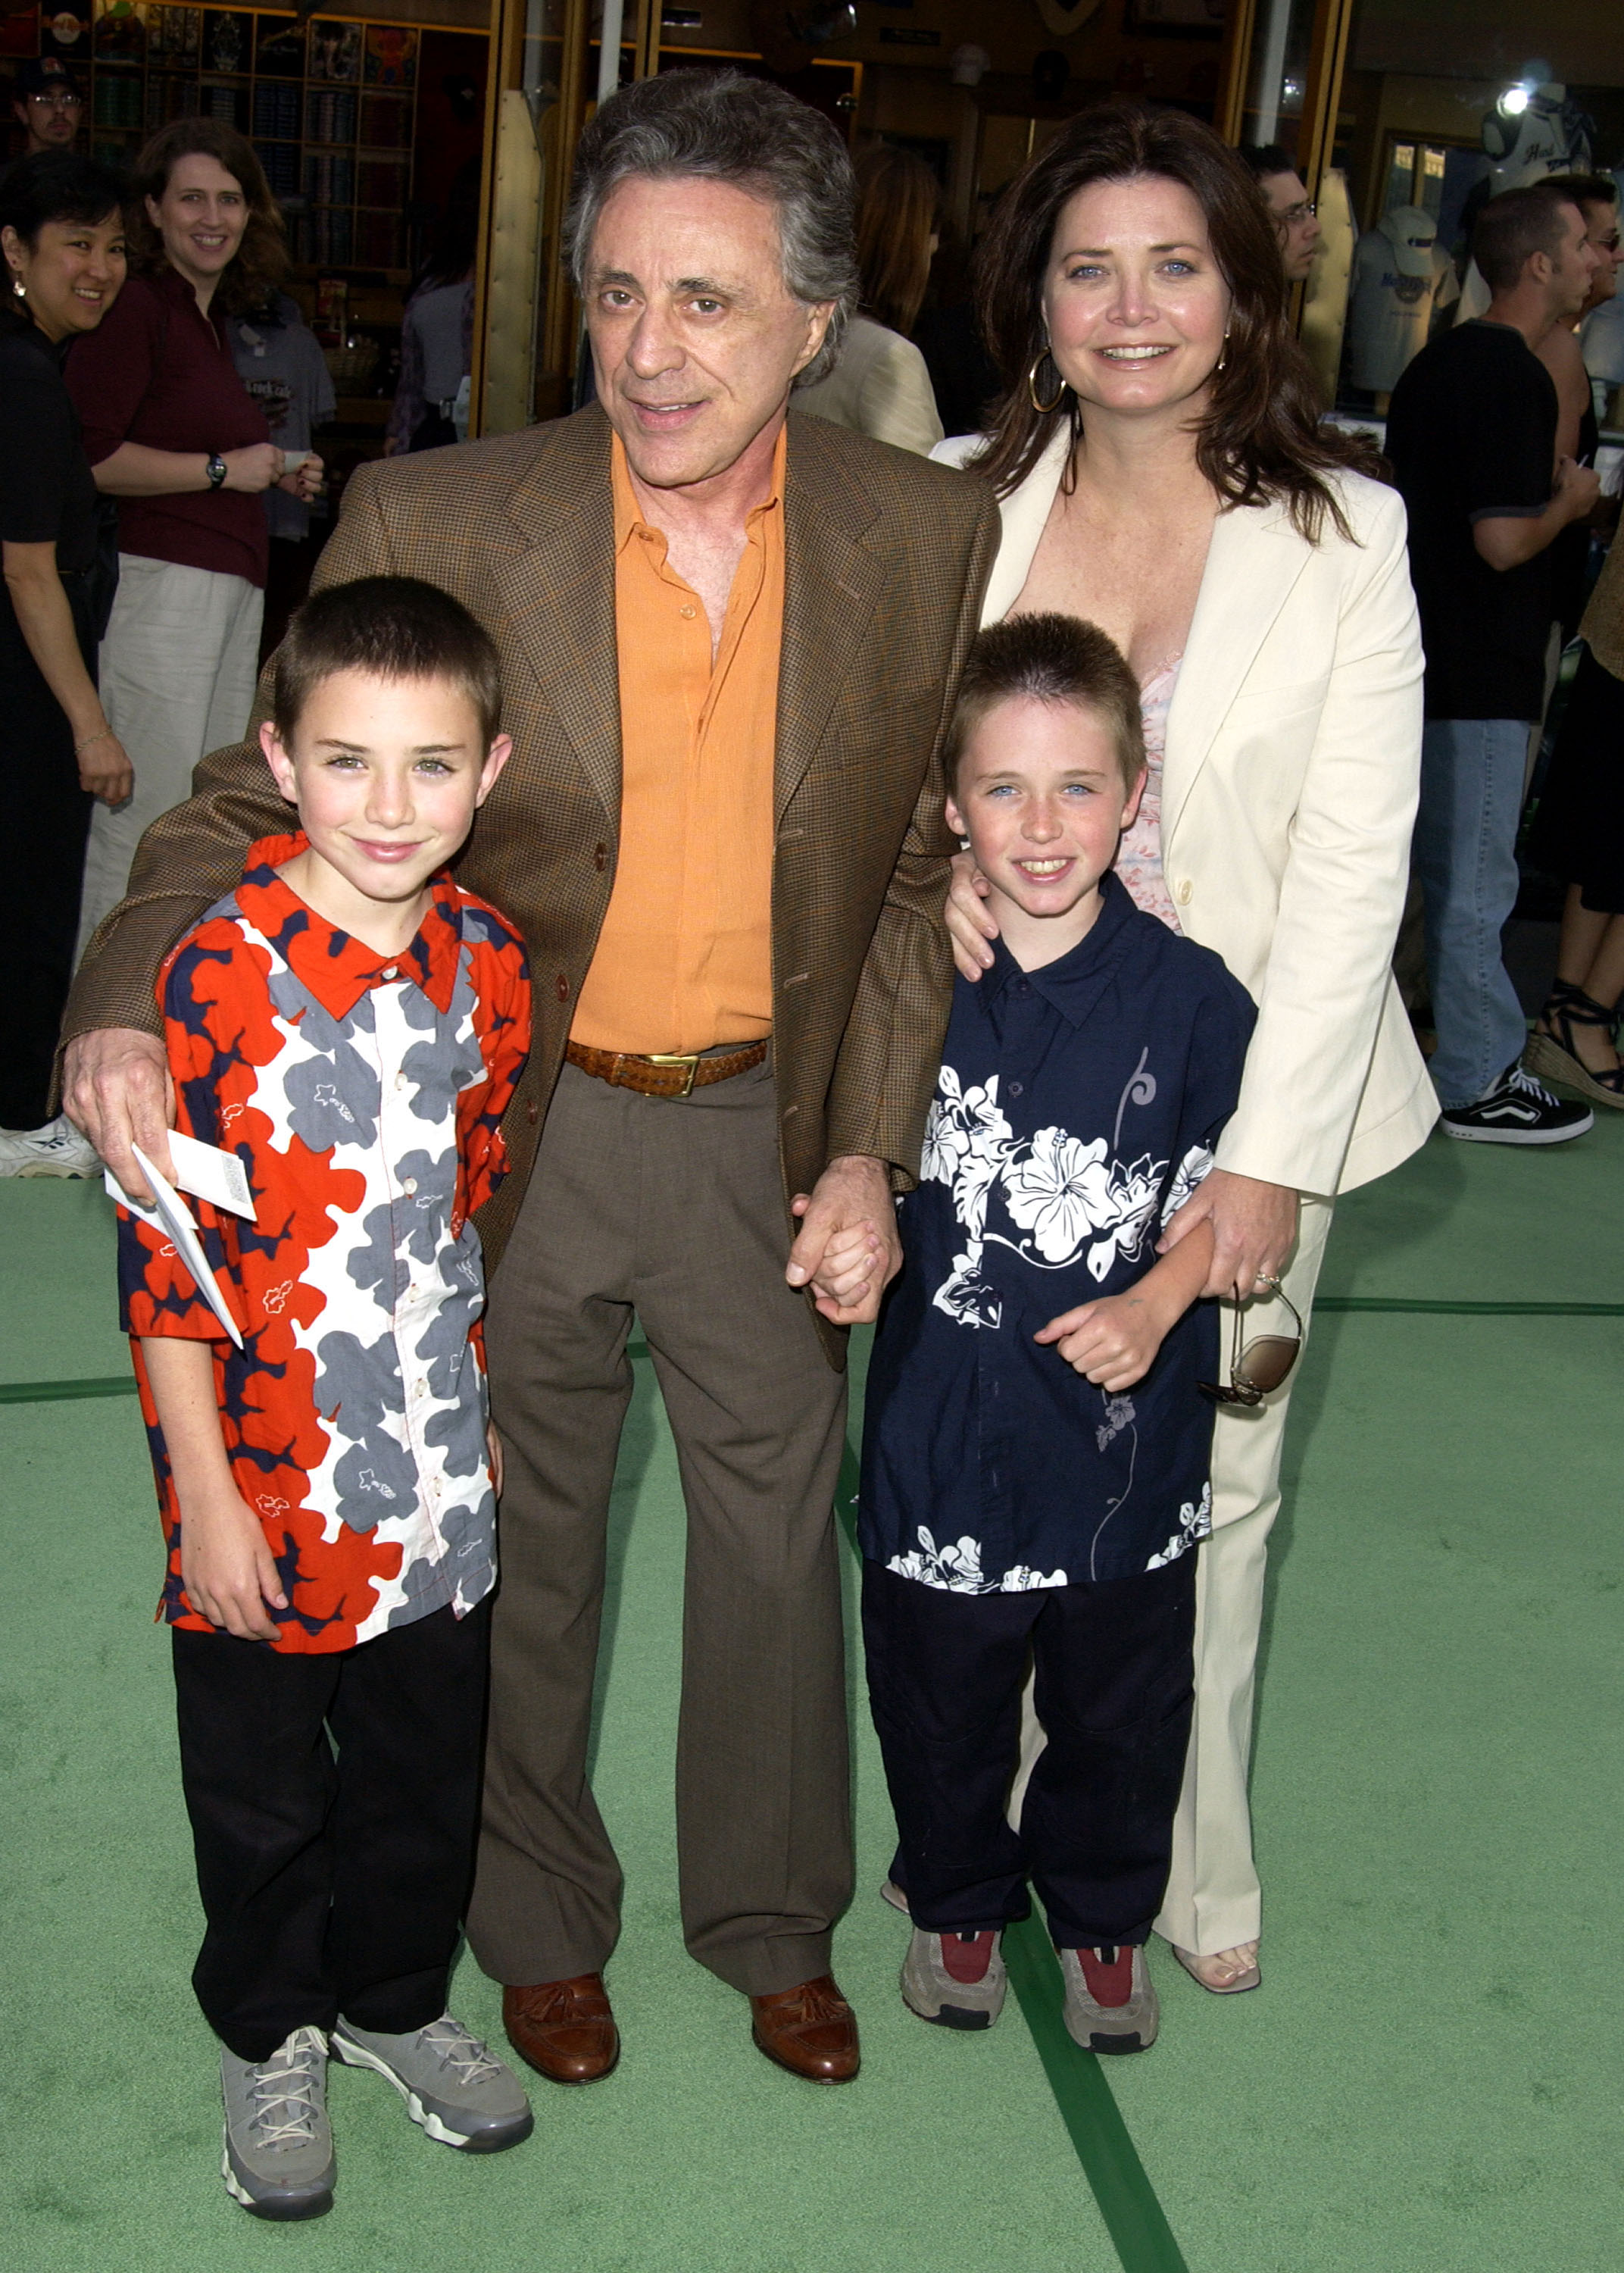 Frankie Valli, his wife Randy, and their sons during the World Premiere of "The Hulk" in Universal City, California, on June 17, 2003 | Source: Getty Images